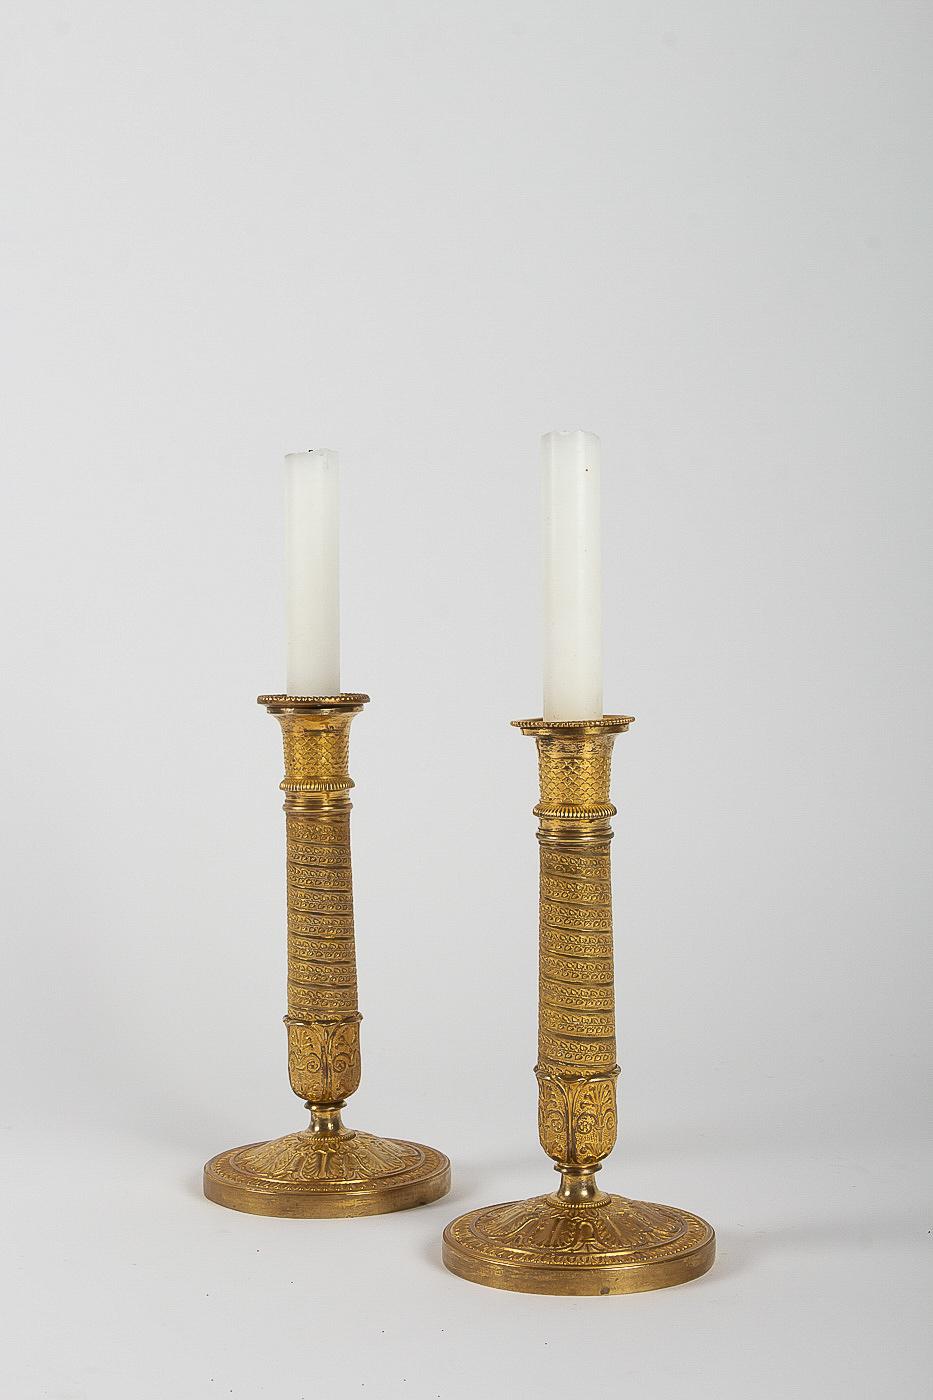 French Empire Period, Pair of Small Chiseled Gilt-Bronze Candlesticks Circa 1805 5